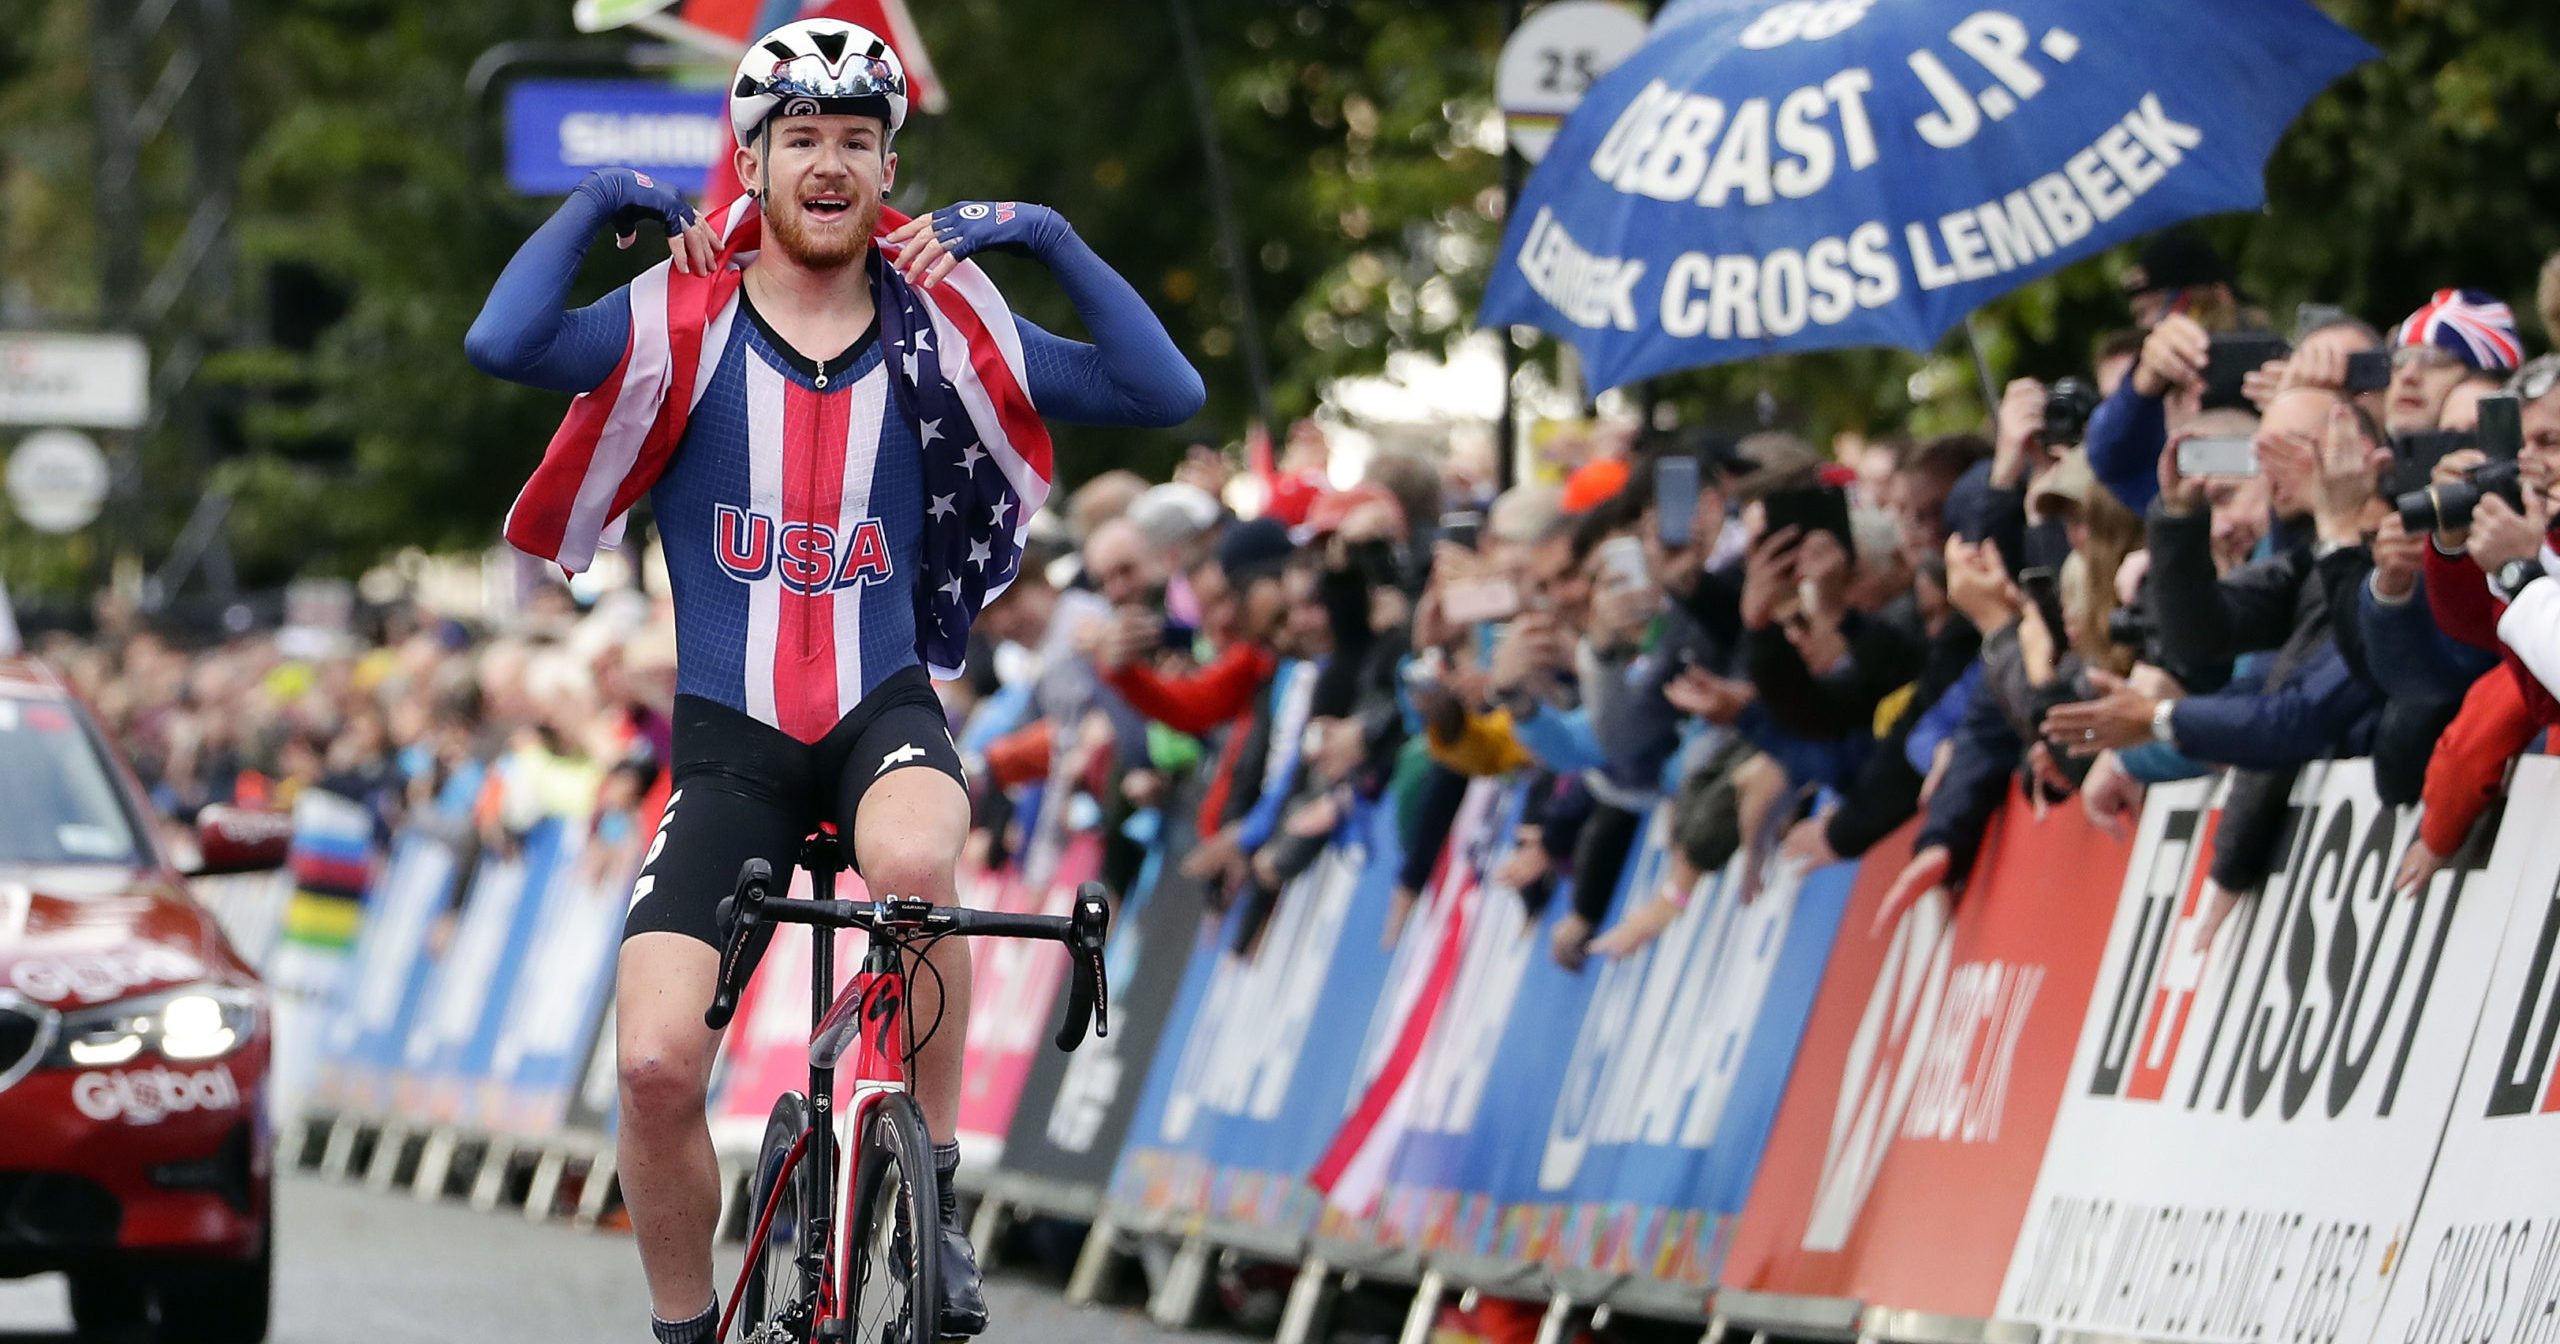 In this Sept. 26, 2019, file photo, the United States' Quinn Simmons celebrates winning the men's junior even, at the road cycling World Championships in Harrogate, England.